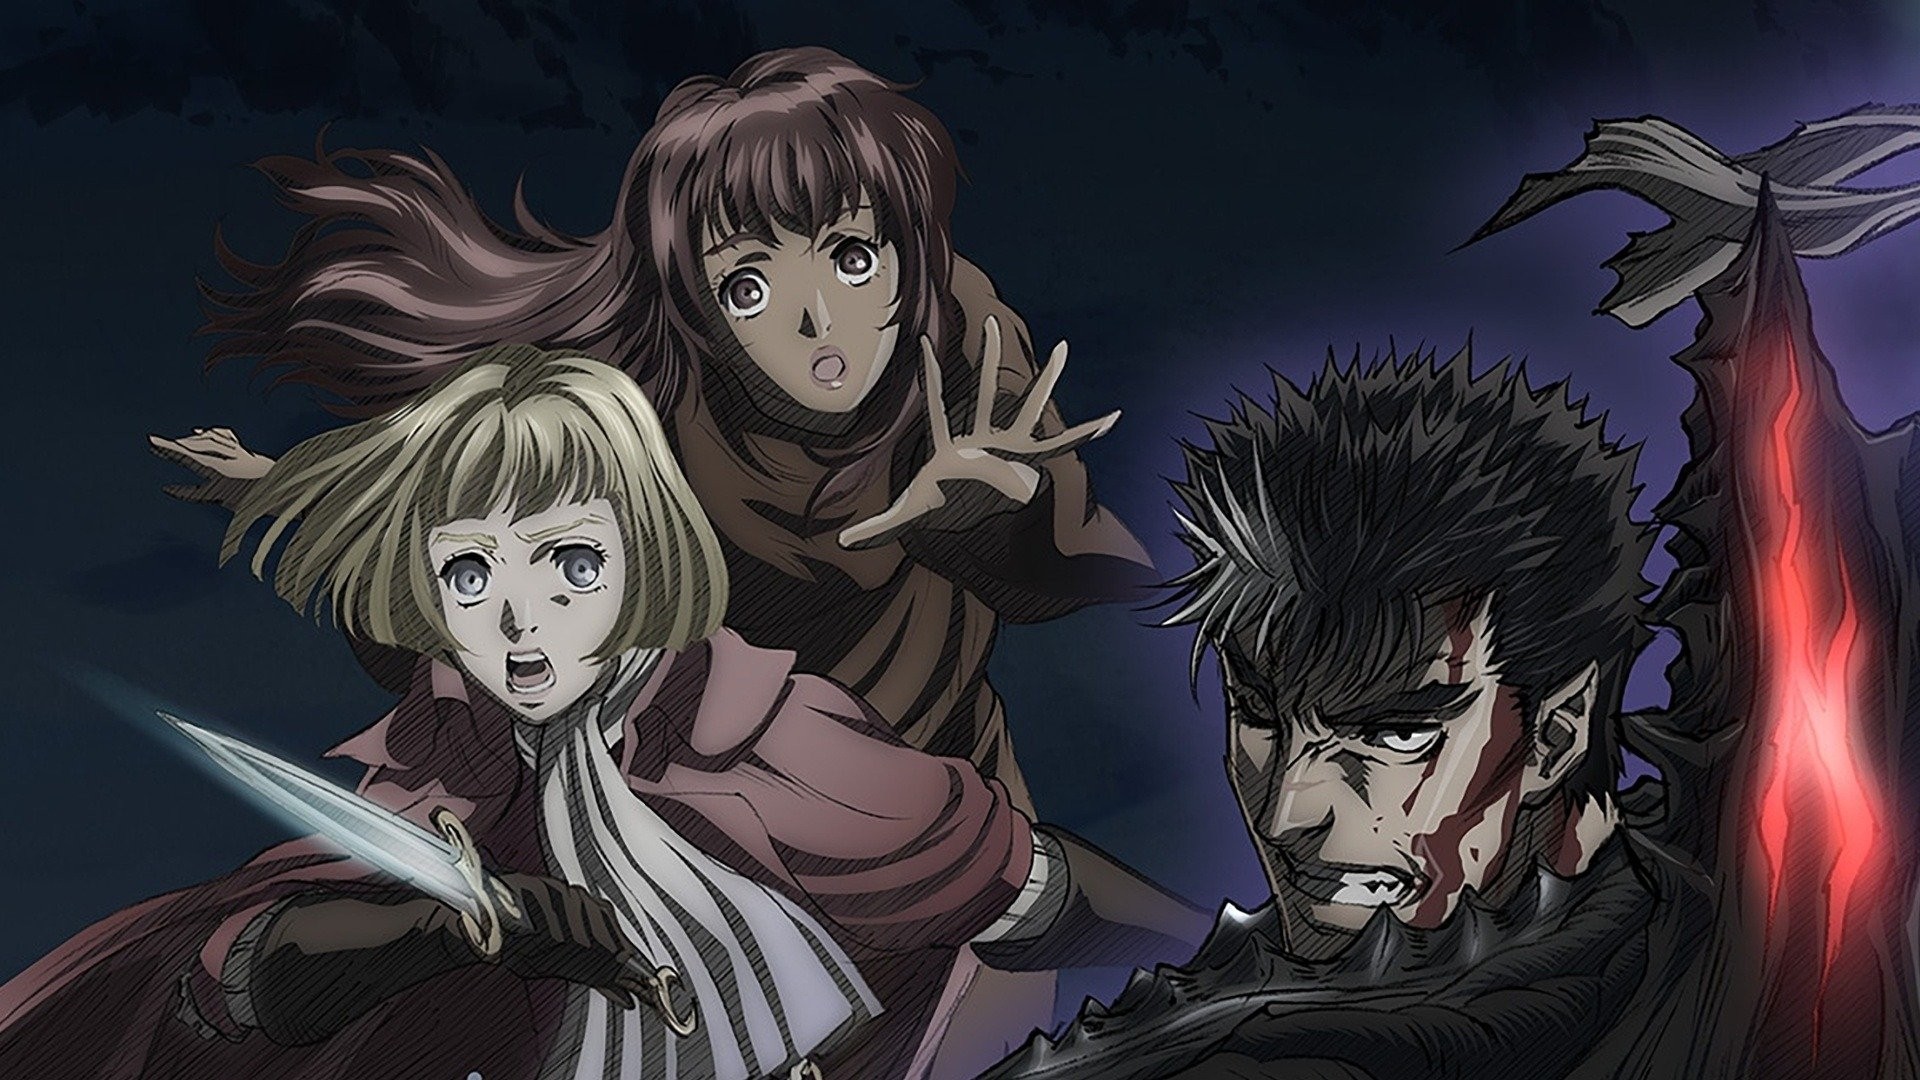 Is it worth it to watch Berserk (2016-17) if you enjoyed a lot the